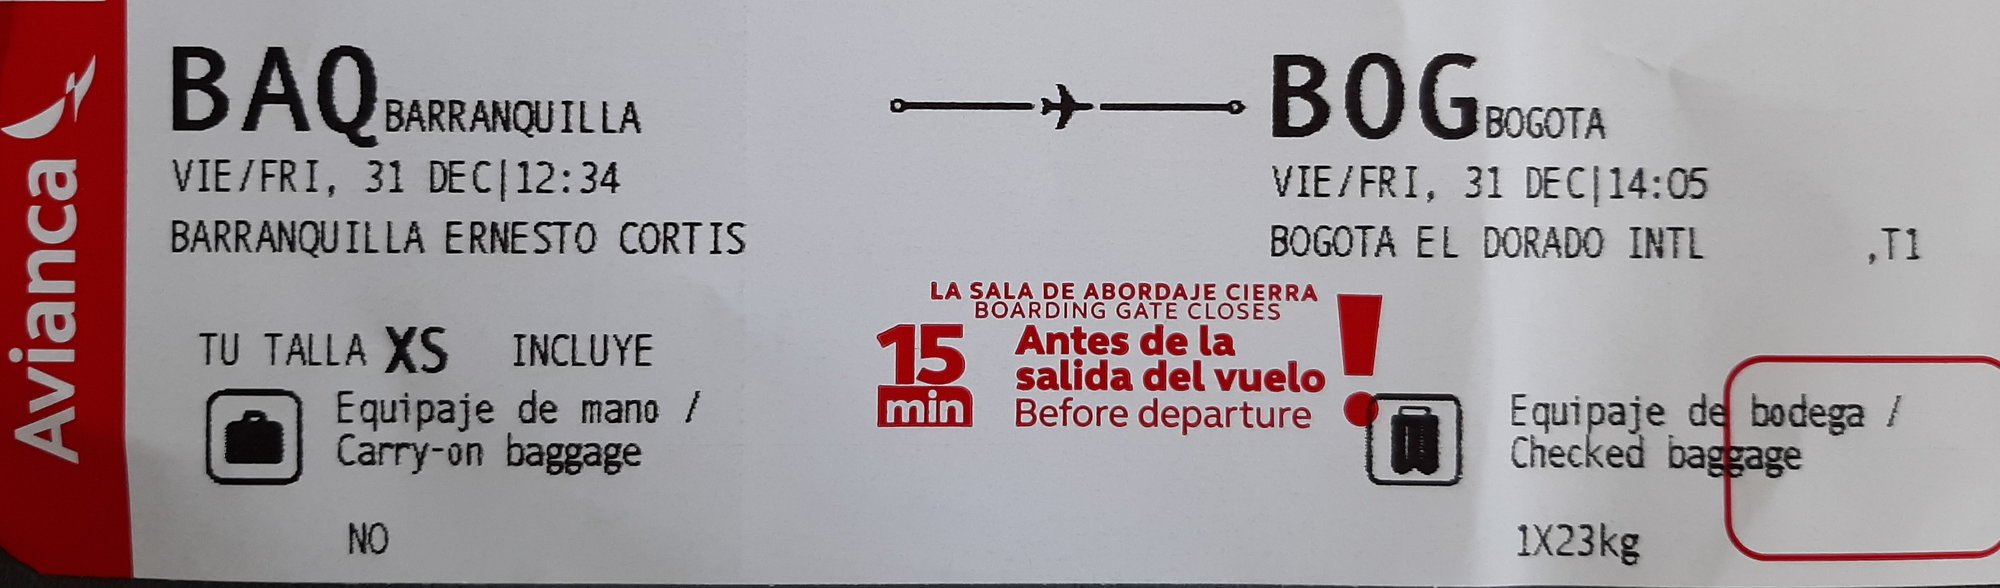 avianca - Baggage policy